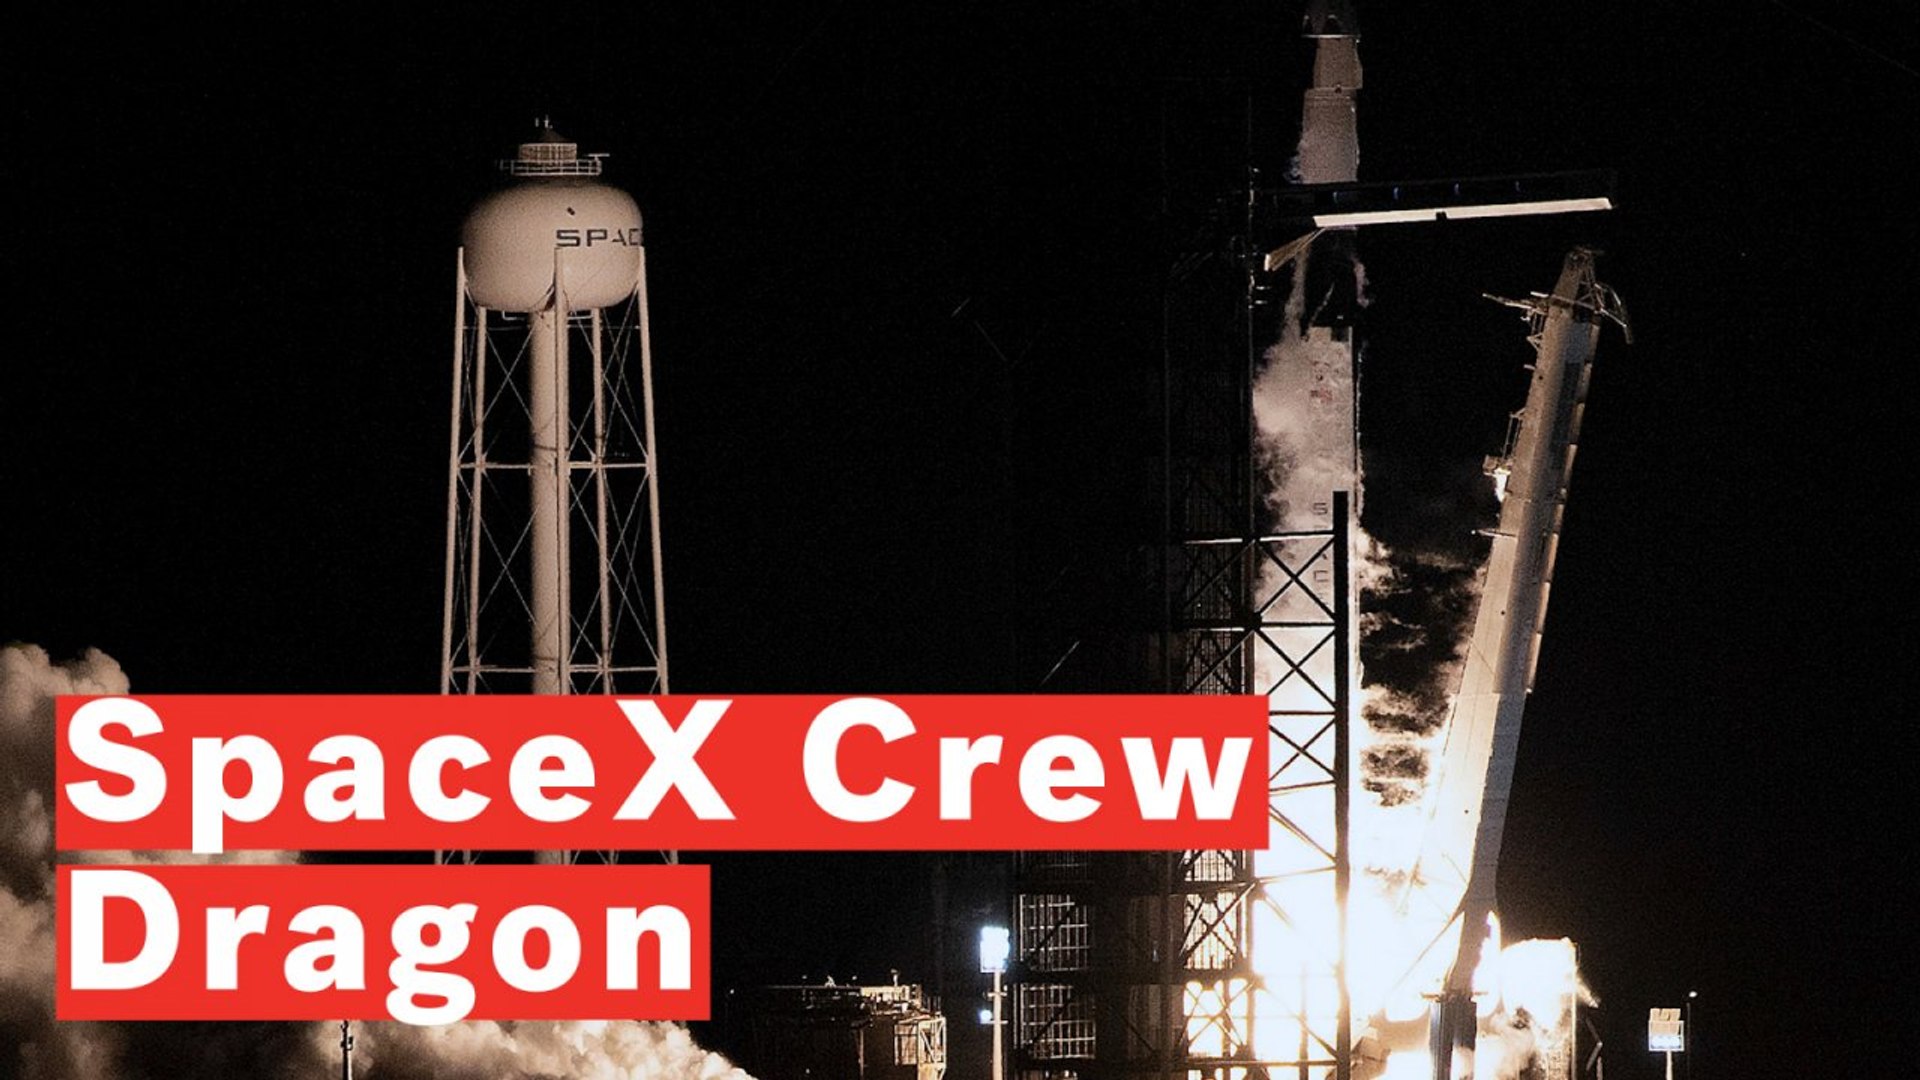 SpaceX's Crew Dragon spacecraft successfully launched on Friday, July 14, 2018, from Launch Complex 